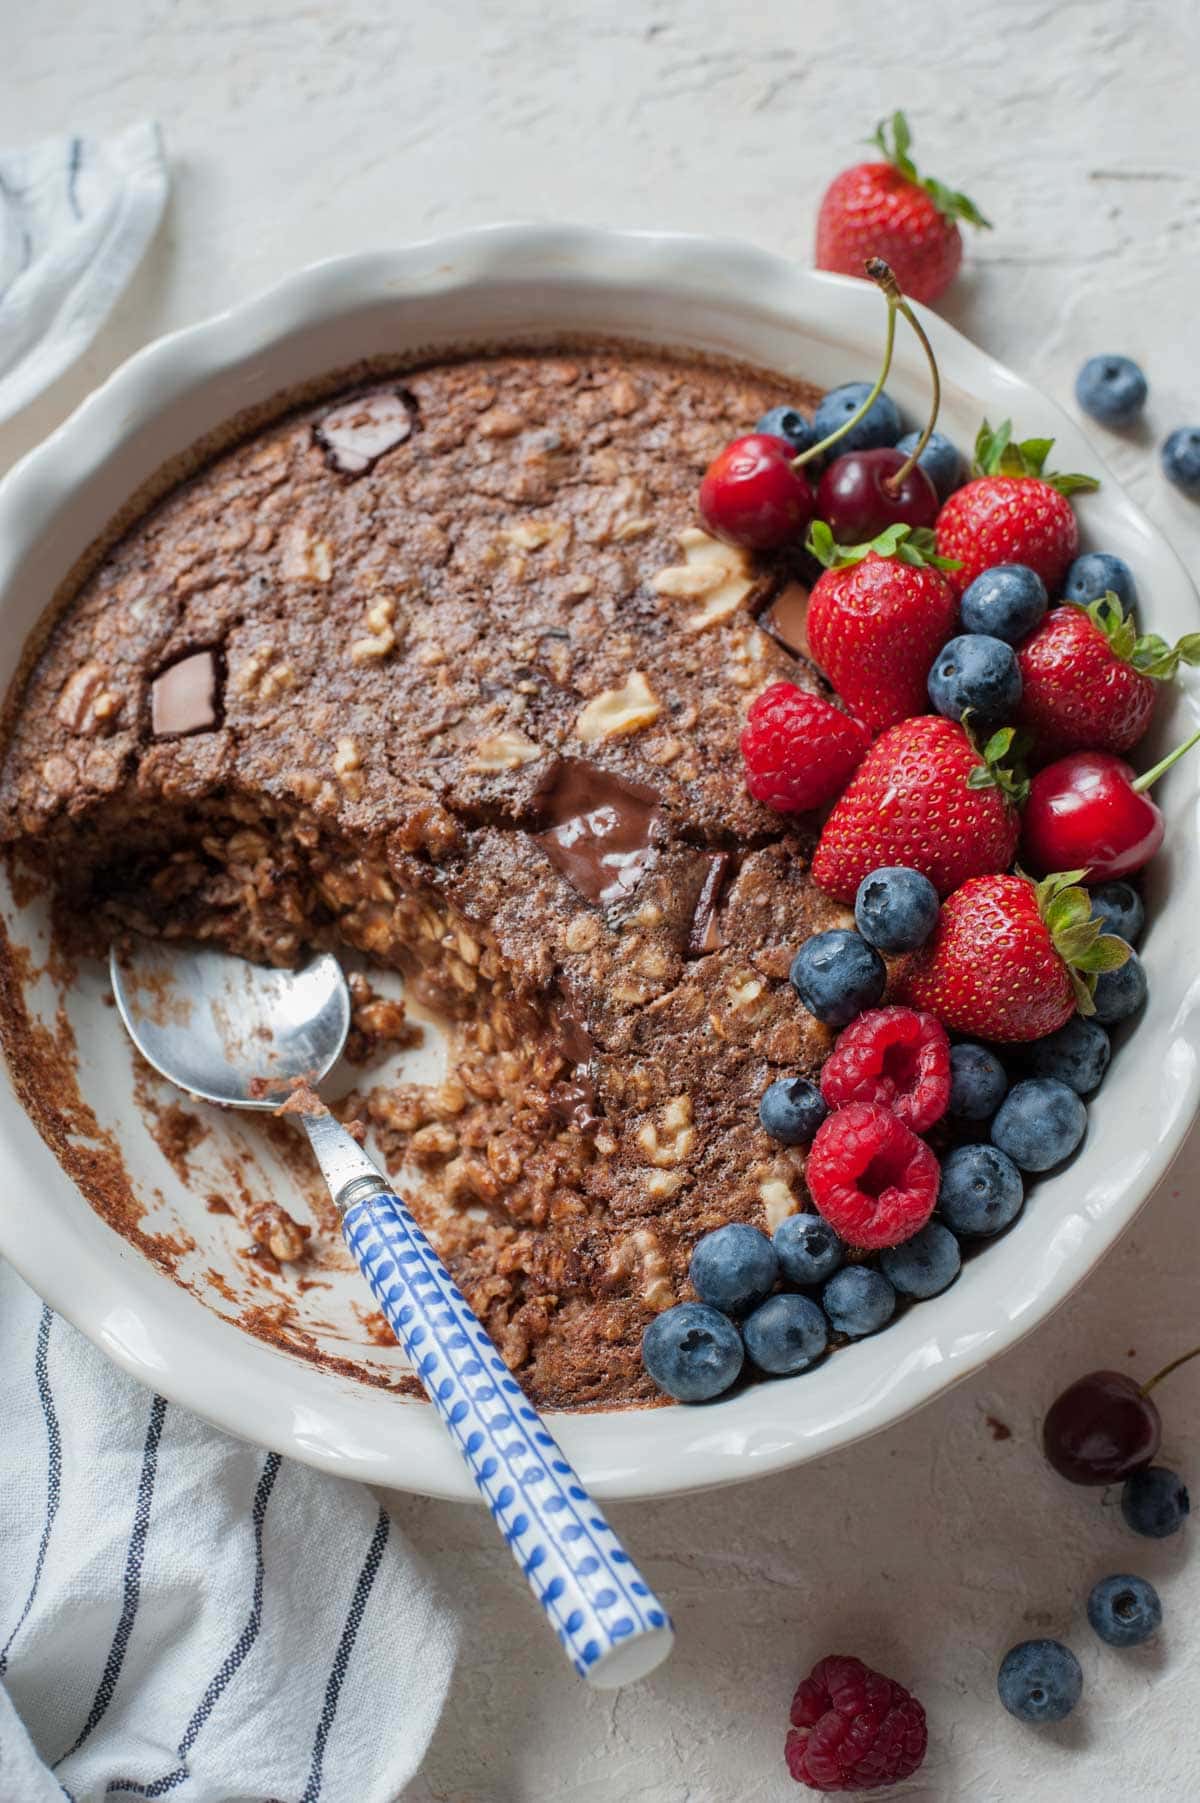 Chocolate oatmeal in a white baking dish with a piece missing topped with fresh berries.